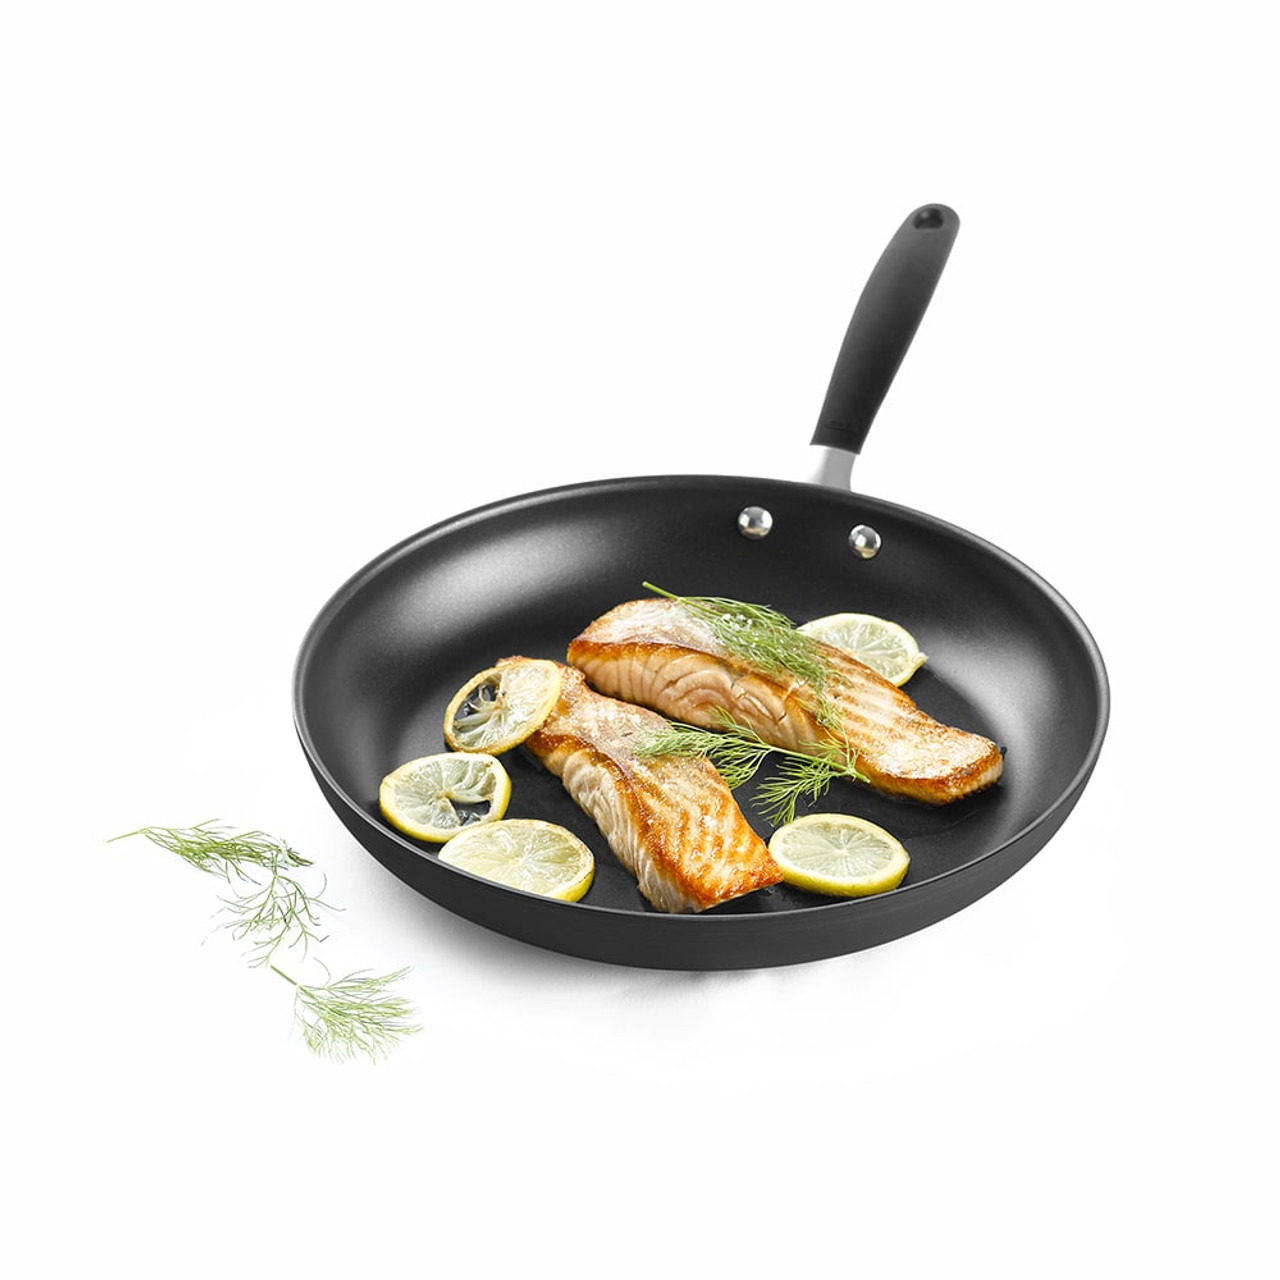 https://cdn11.bigcommerce.com/s-hccytny0od/images/stencil/1280x1280/products/359/3584/oxo-good-grips-nonstick-open-fry-pan-1__98000.1590551710.jpg?c=2?imbypass=on